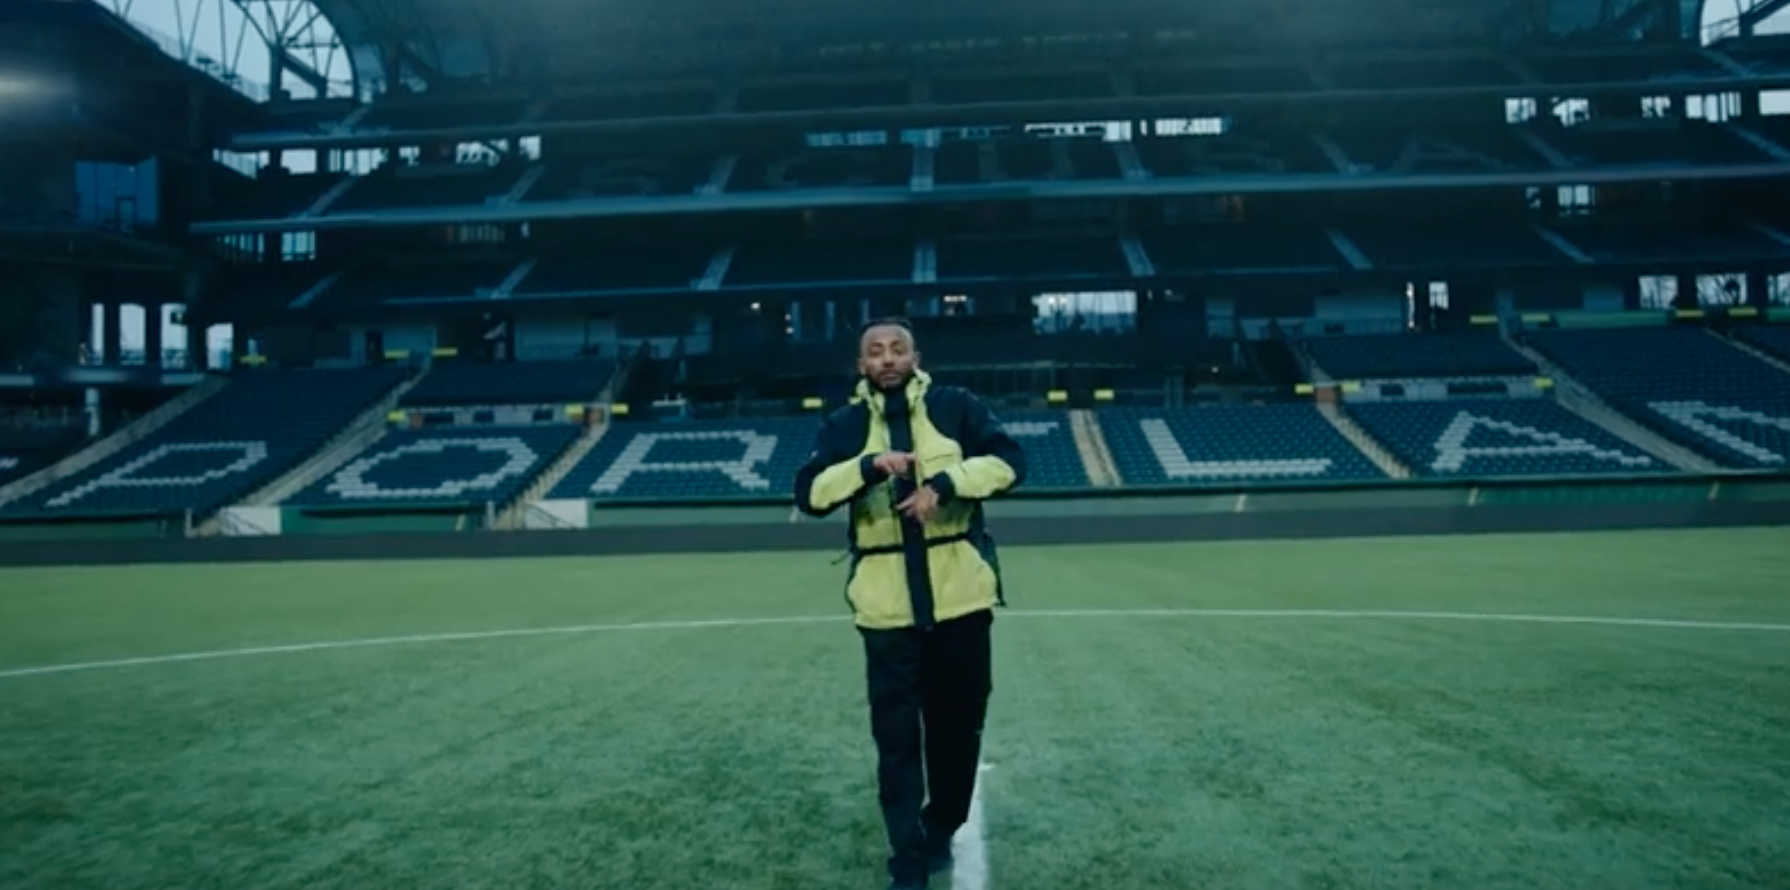 Amine Puts On For Portland In His Triumphant 'Woodlawn' Video